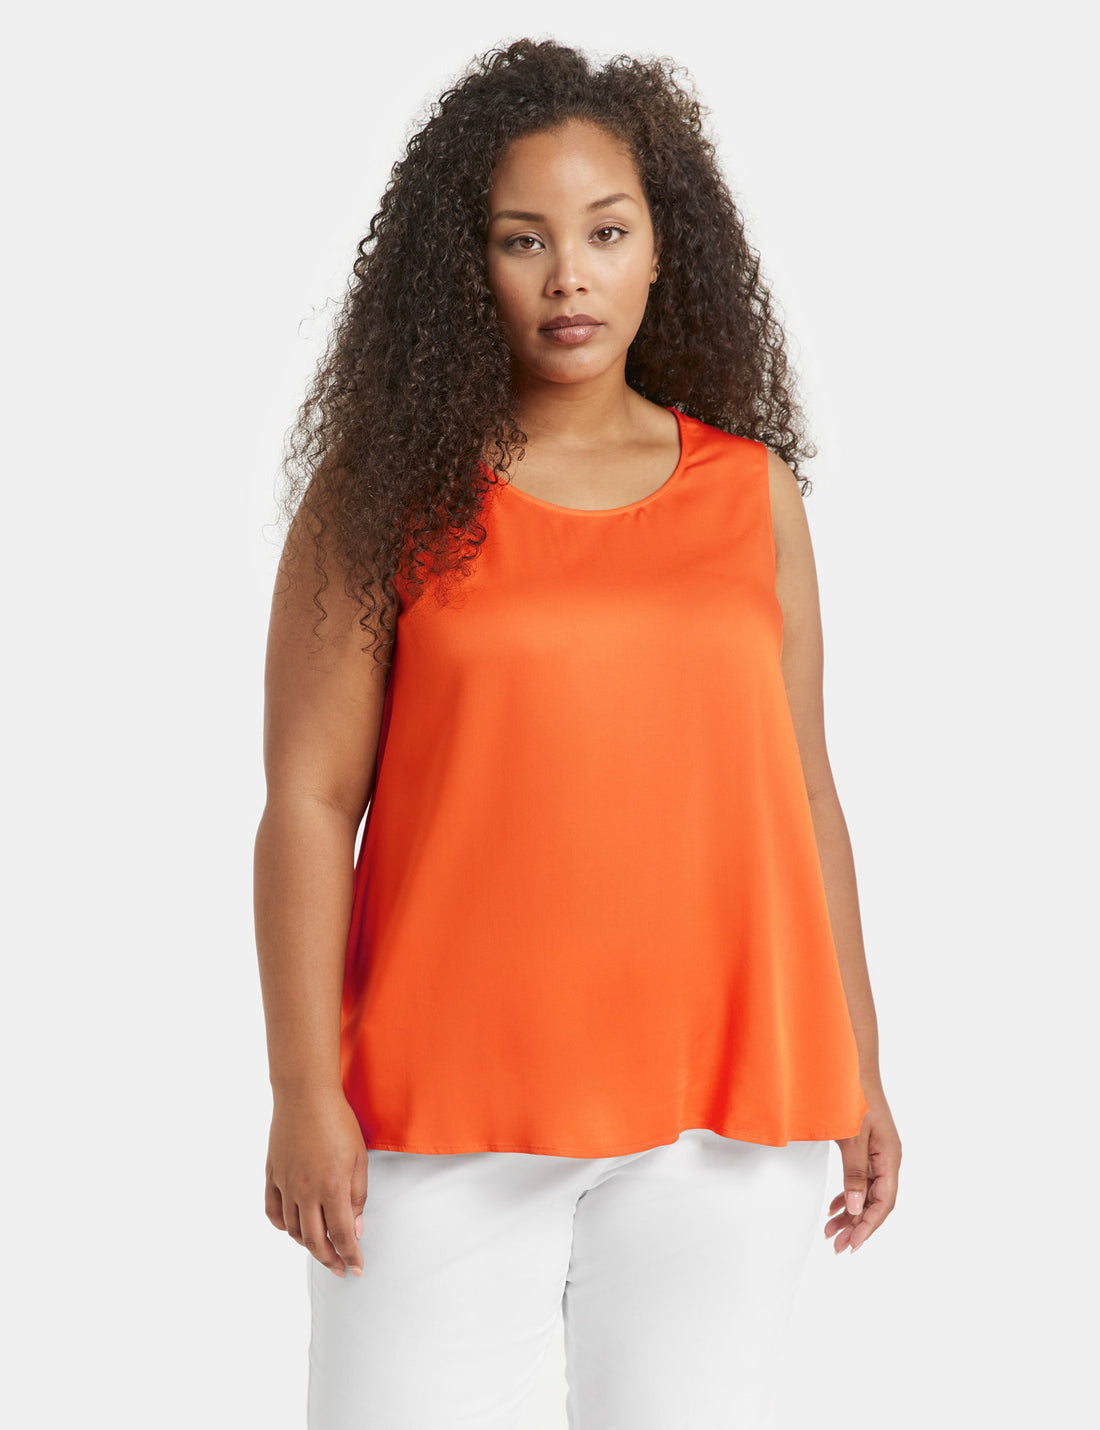 Blouse Top With Side Slits_960994-29141_6530_01